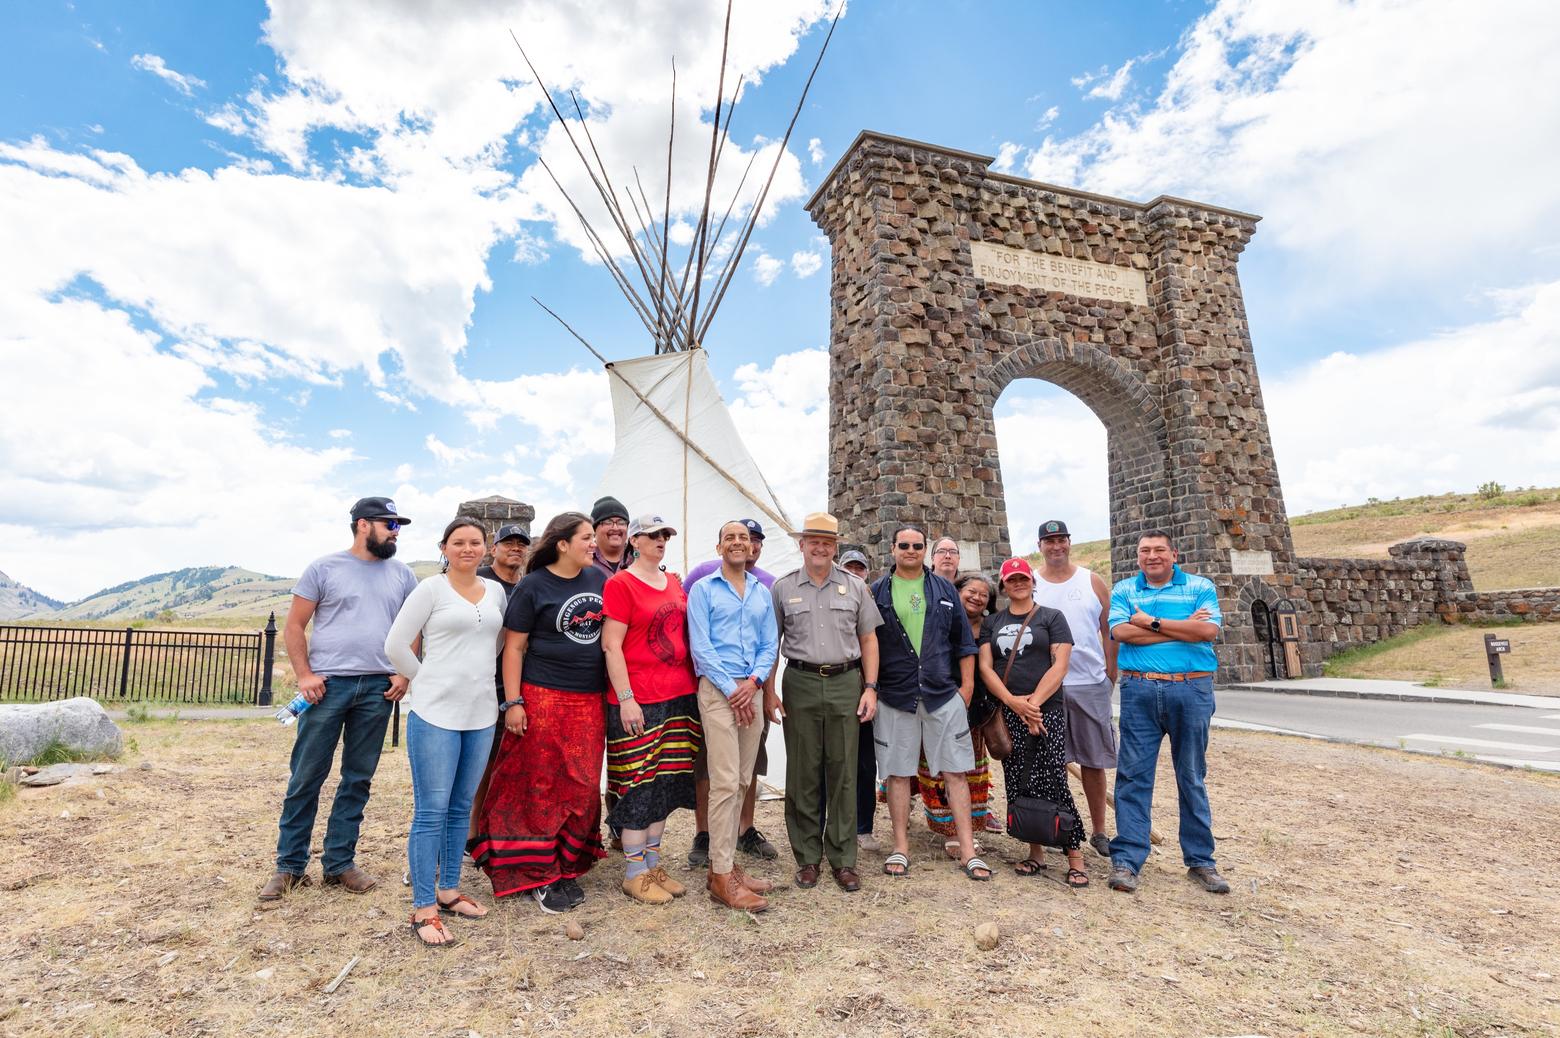 Some of the tribal representatives, artists and Park Service leaders who gathered for the tipi installation at Yellowstone's front entrance. The event was marked by an honoring song from Shane Doyle pictured in blue shirt, center and Sholly to his right. Photo courtesy Jacob W. Frank/NPS